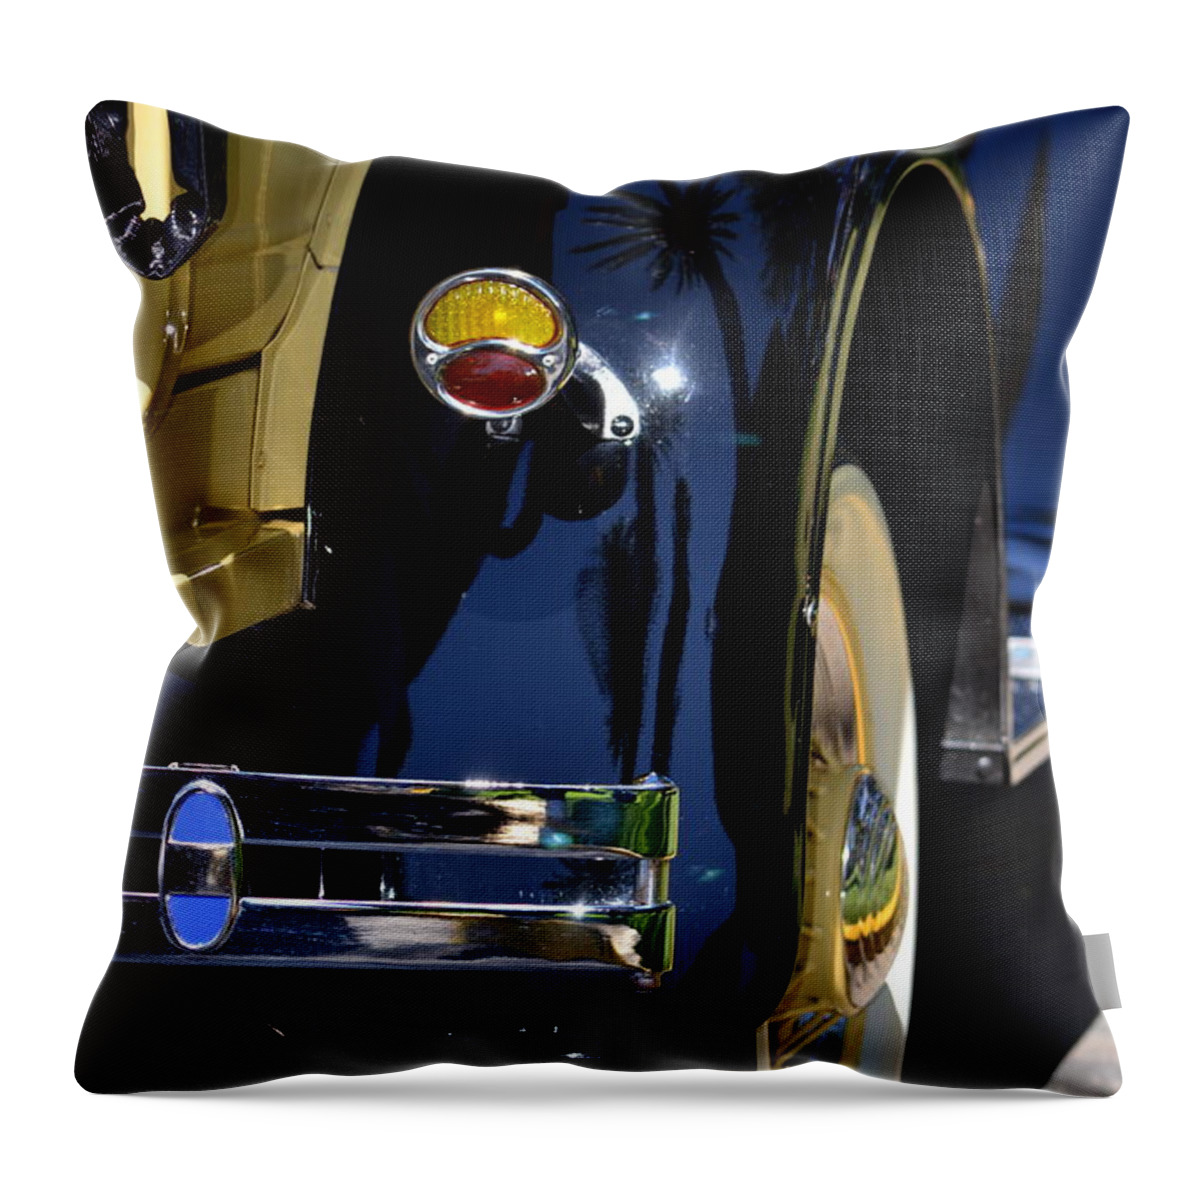 Black Throw Pillow featuring the photograph Ford Pickup by Dean Ferreira